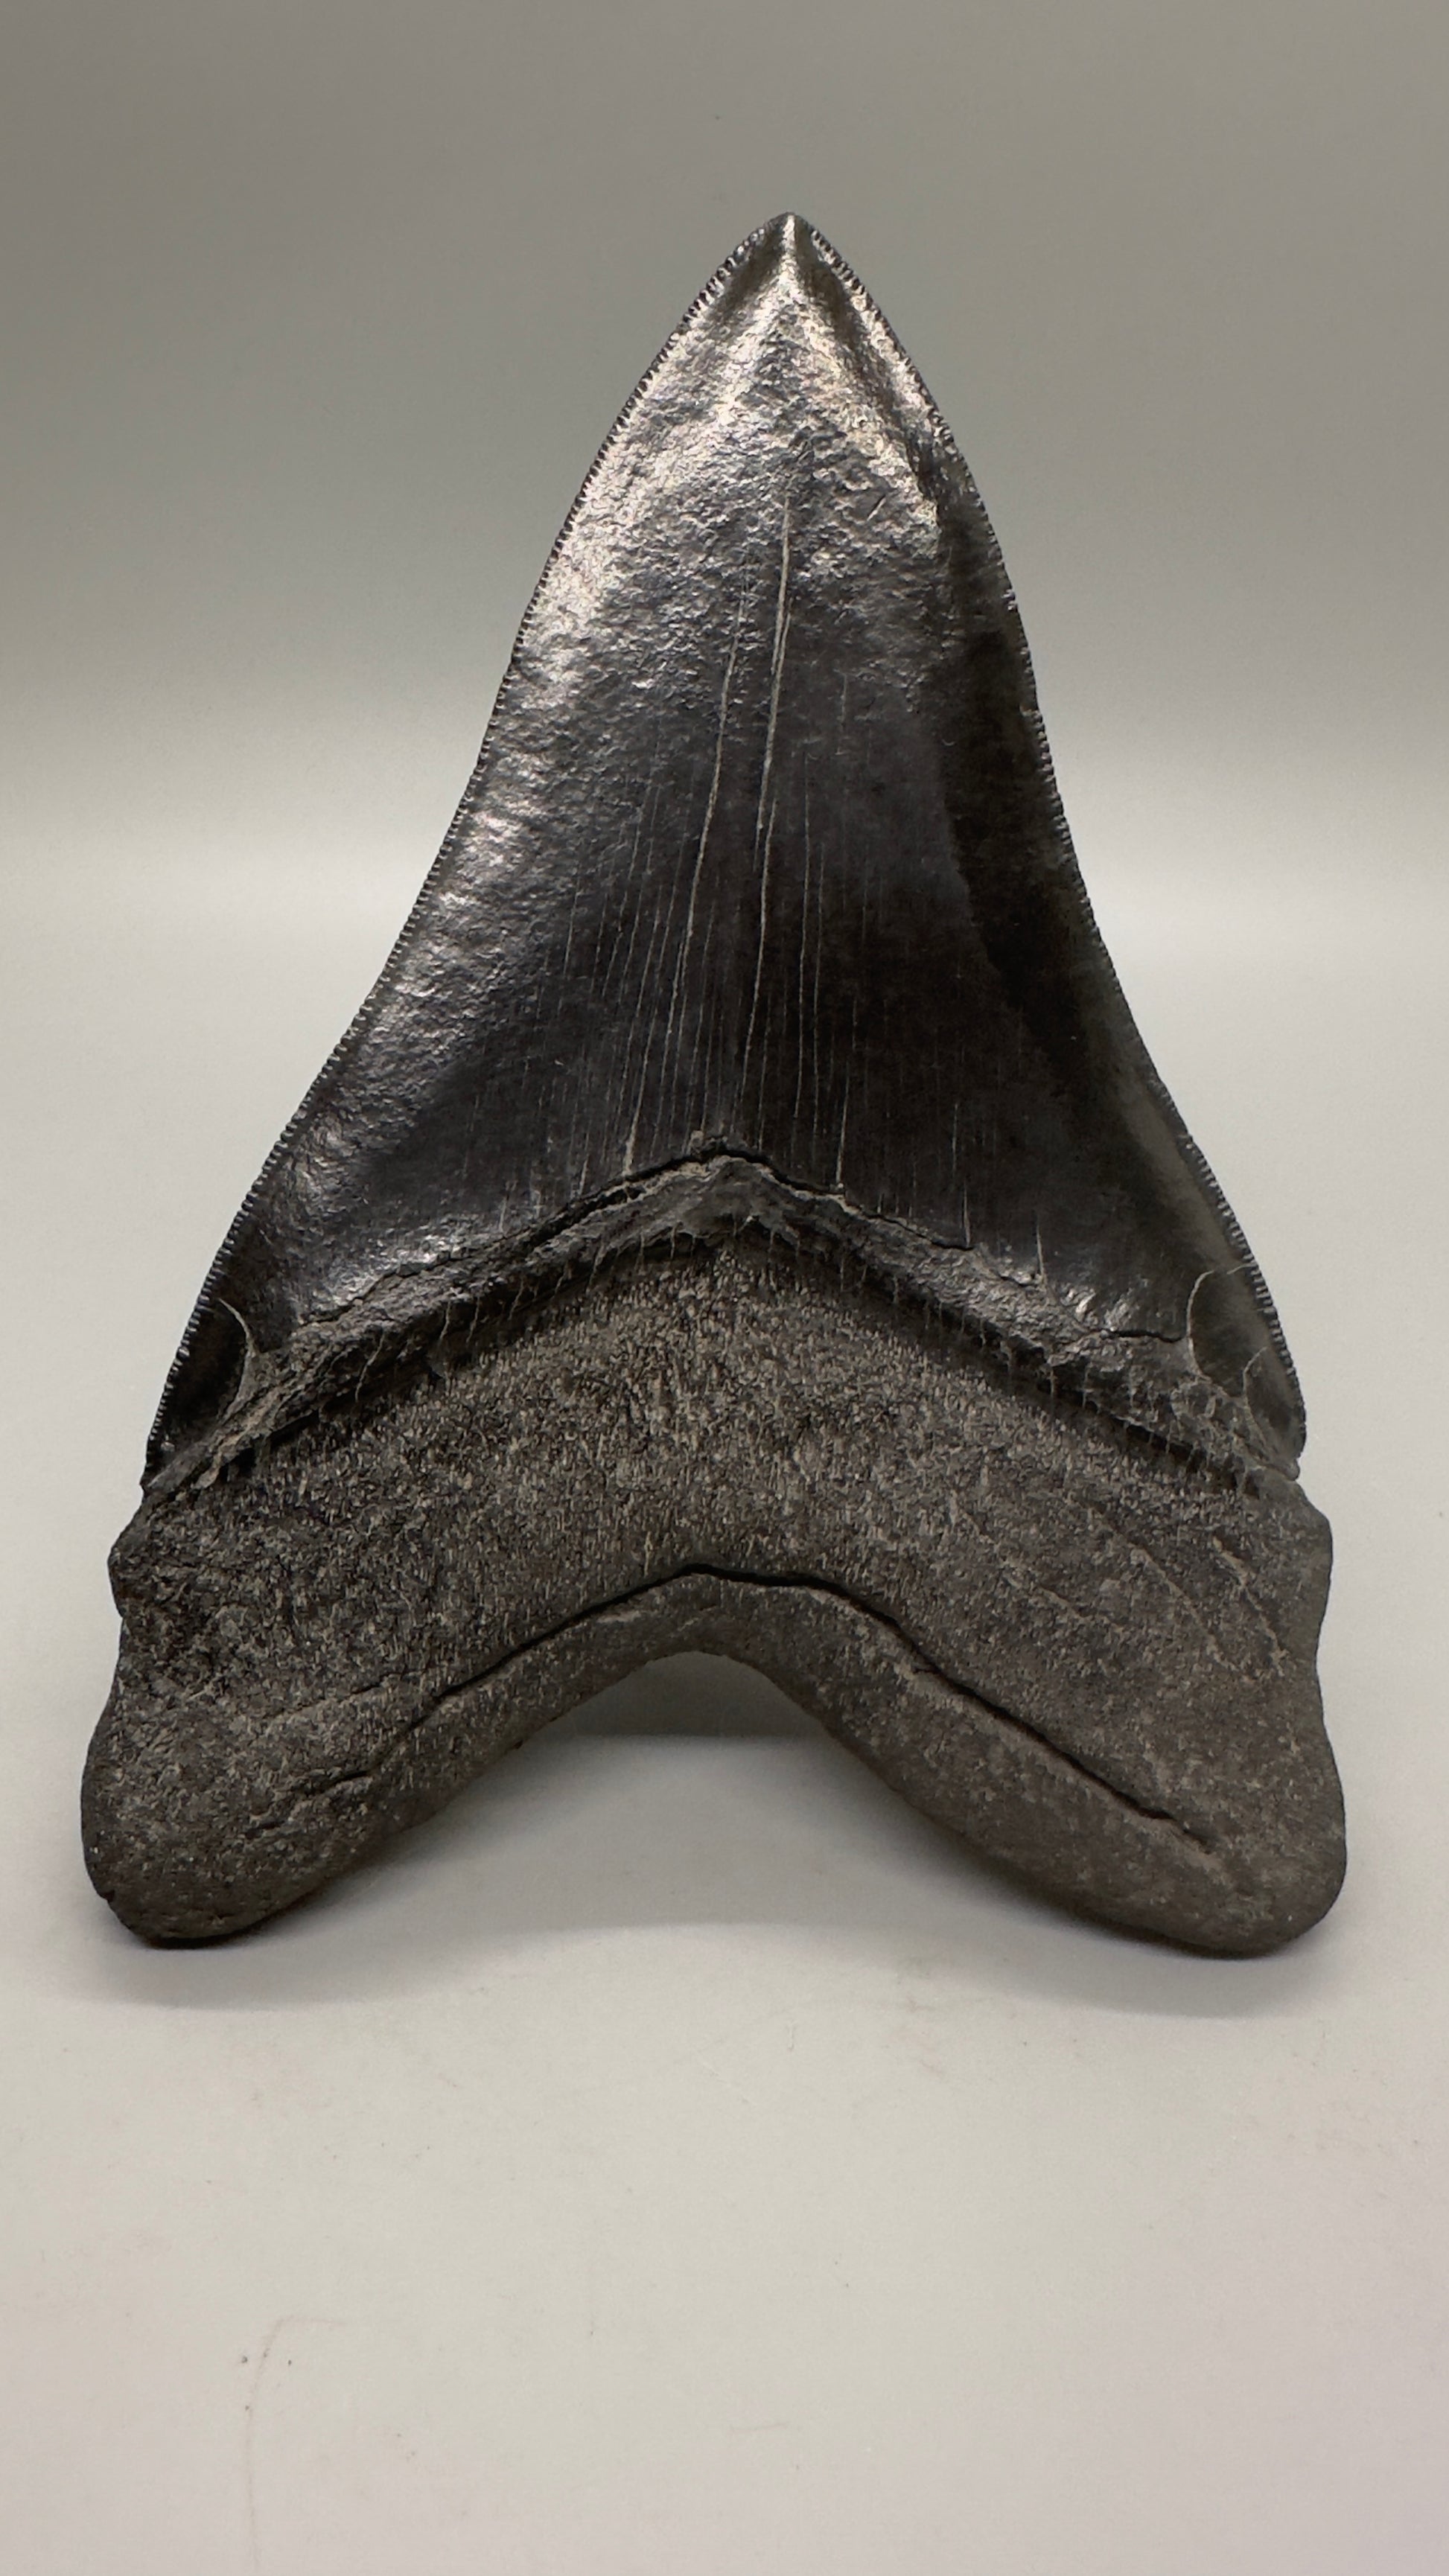 EXTRA LARGE 6.04" Fossil Megalodon Tooth: Scuba Diving, USA CM4633 - Back